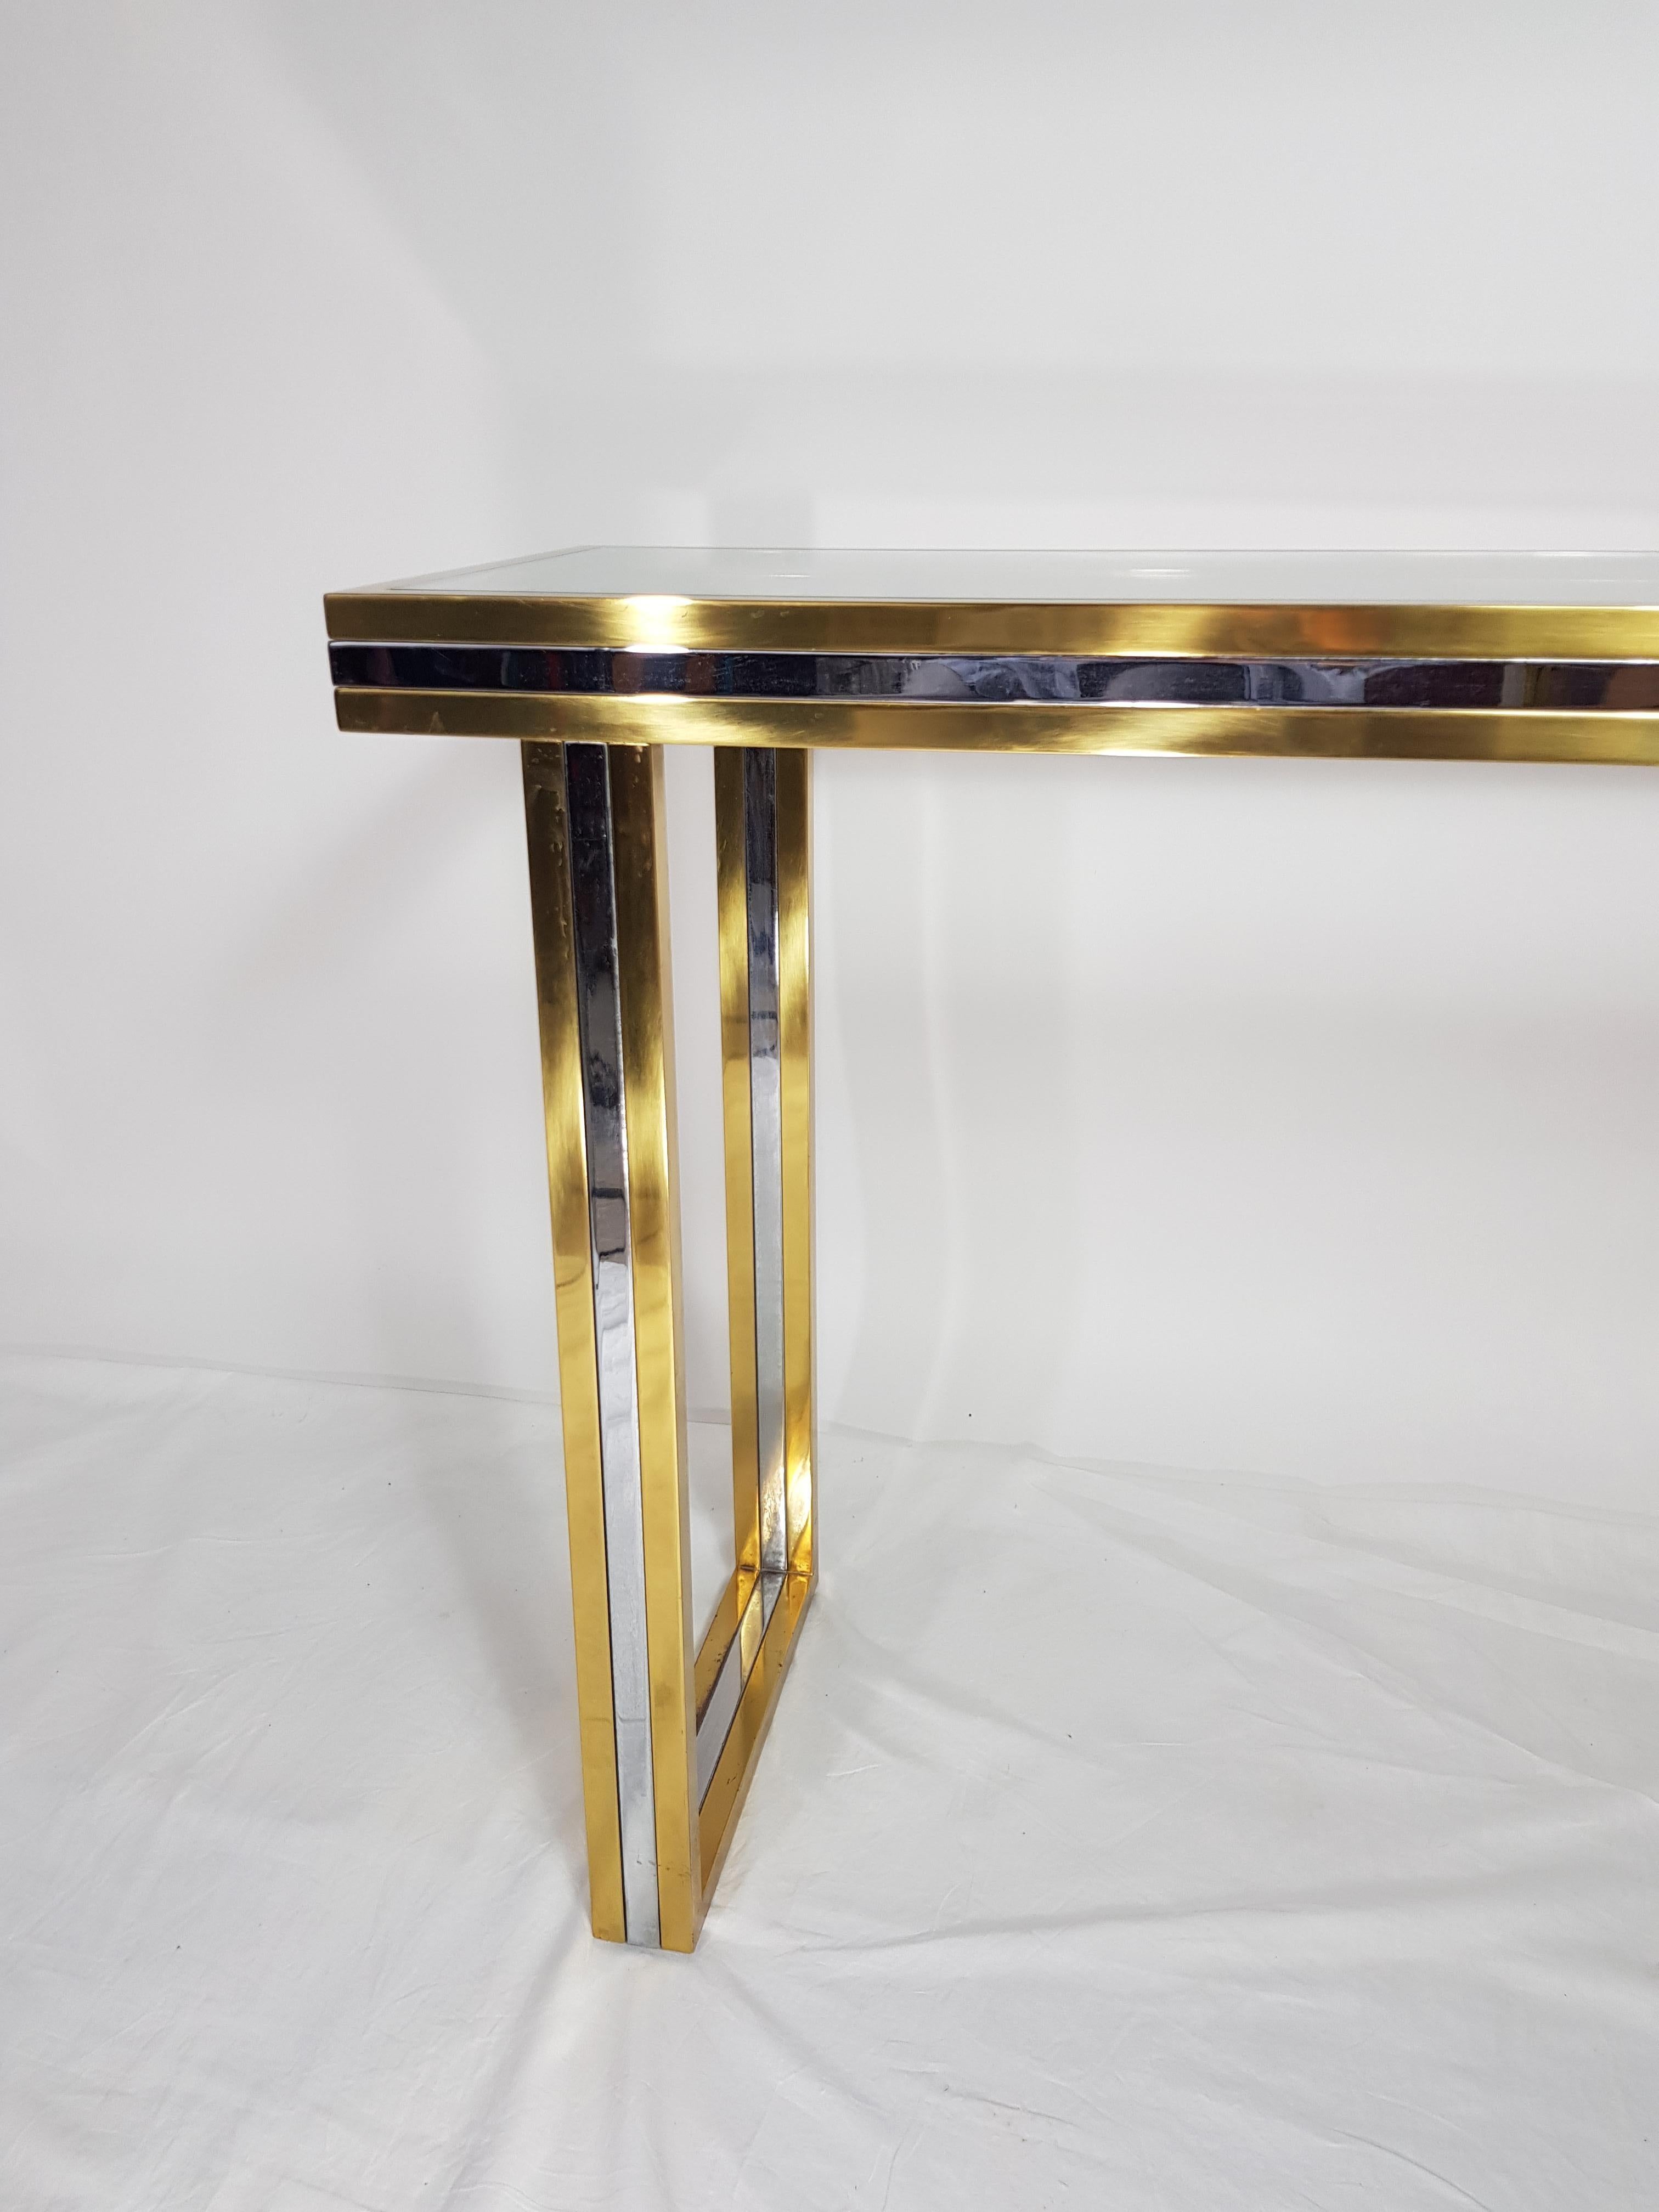 Gold brass and silver chrome with a recessed glass tray large console table, from the designer Roméo Rega
Itaty, 1970s.
 